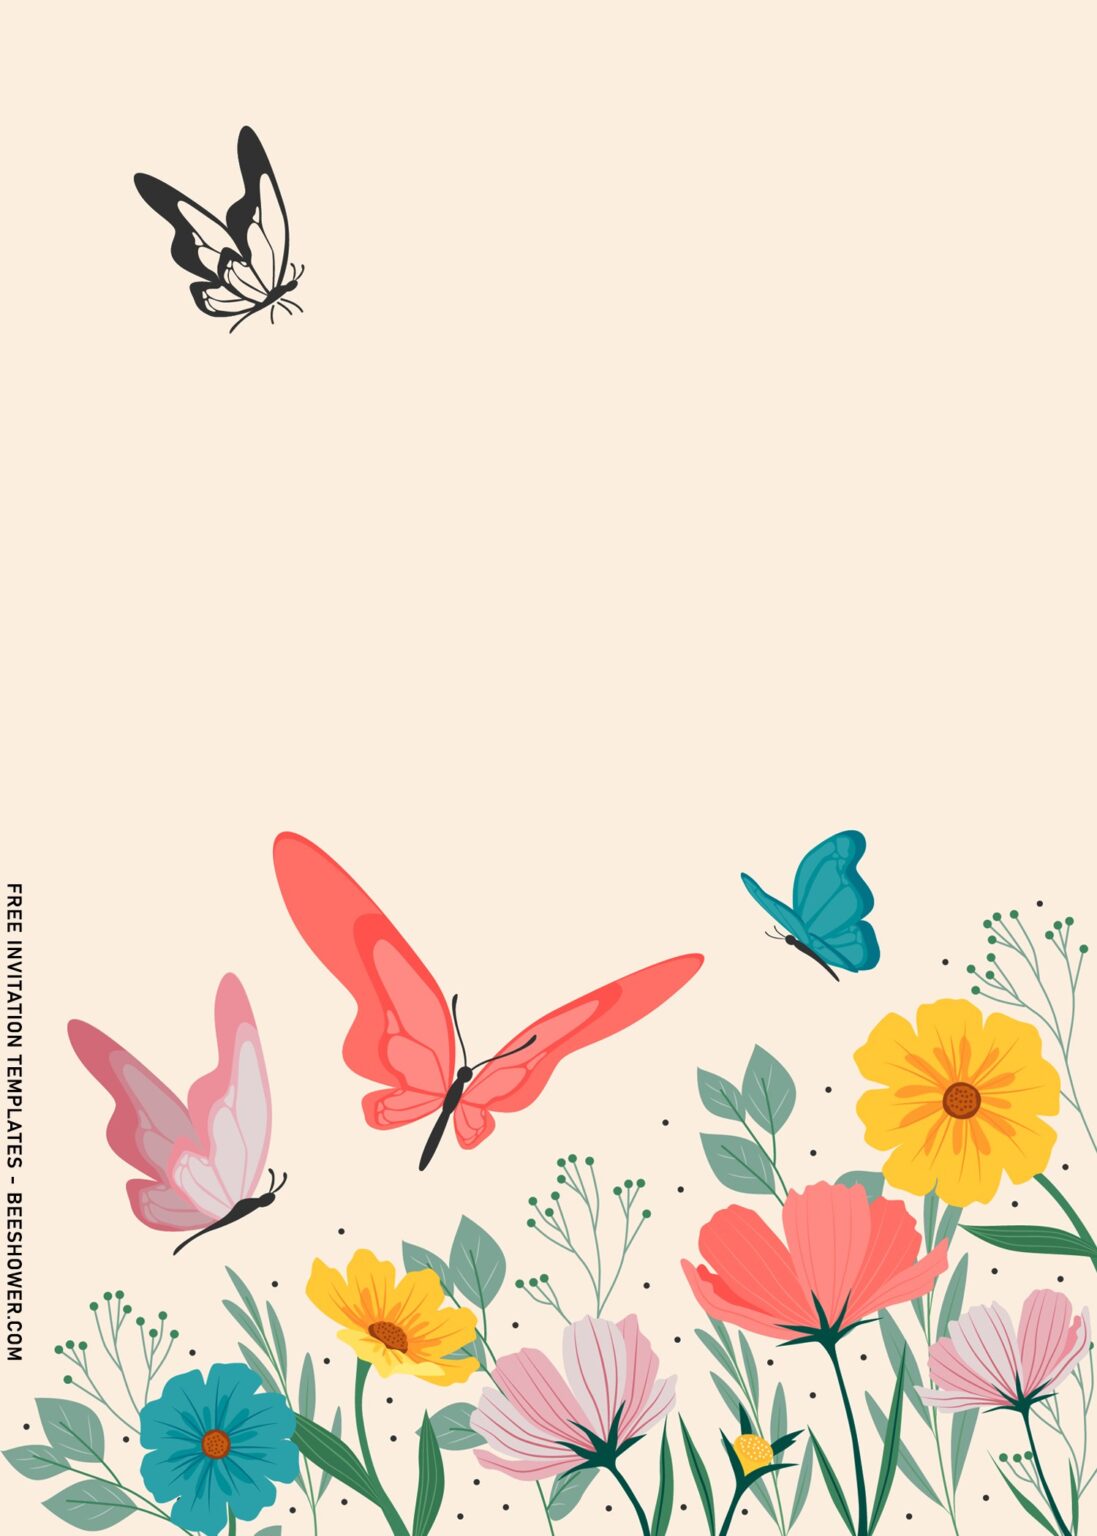 8+ Aesthetic Floral And Butterfly Birthday Invitation Templates FREE